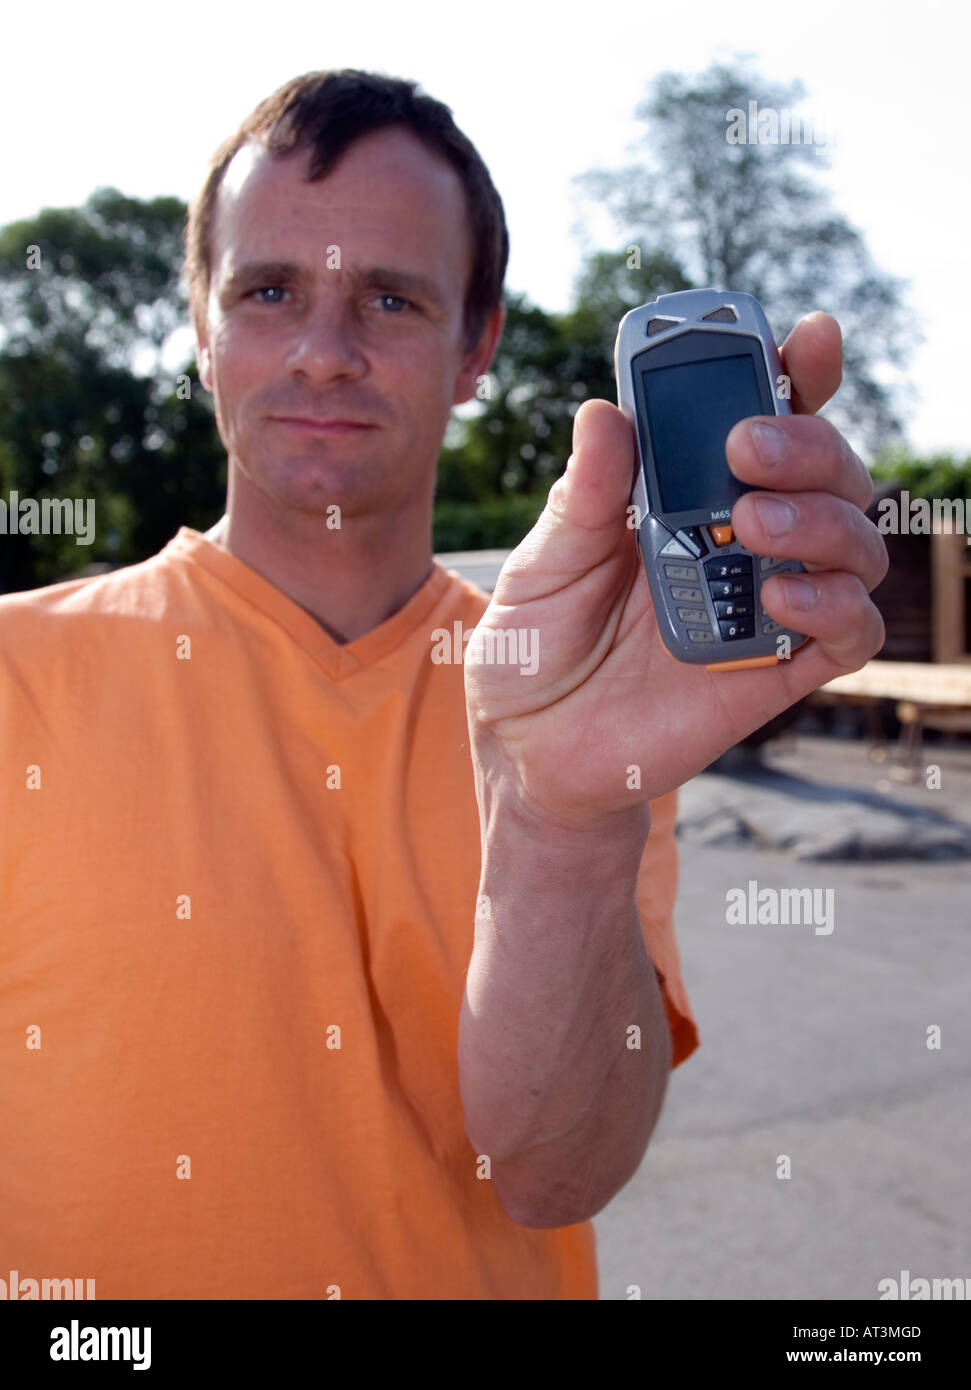 Model released portrait of a man holding a cellphone Stock Photo